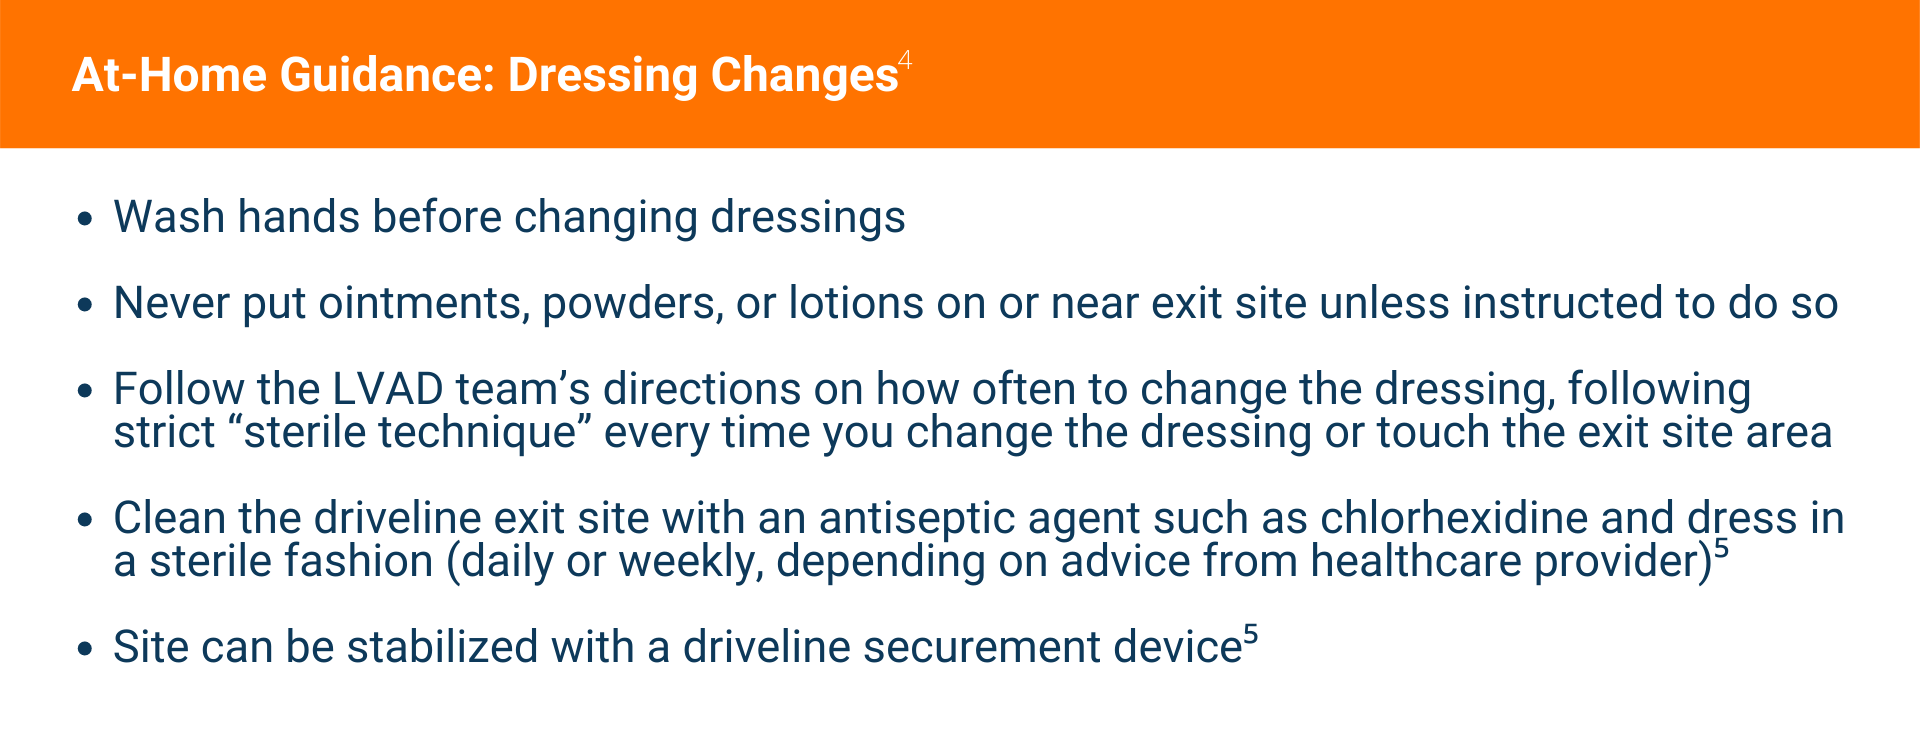 At‐Home Guidance: Dressing Changes Wash hands before changing dressings  Never put ointments, powders, or lotions on or near exit site unless instructed to do so  Follow the LVAD team’s directions on how often to change the dressing, following strict “sterile technique” every time you change the dressing or touch the exit site area  Clean the driveline exit site with an antiseptic agent such as chlorhexidine and dress in a sterile fashion (daily or weekly, depending on advice from healthcare provider)5  Site can be stabilized with a driveline securement device5 [